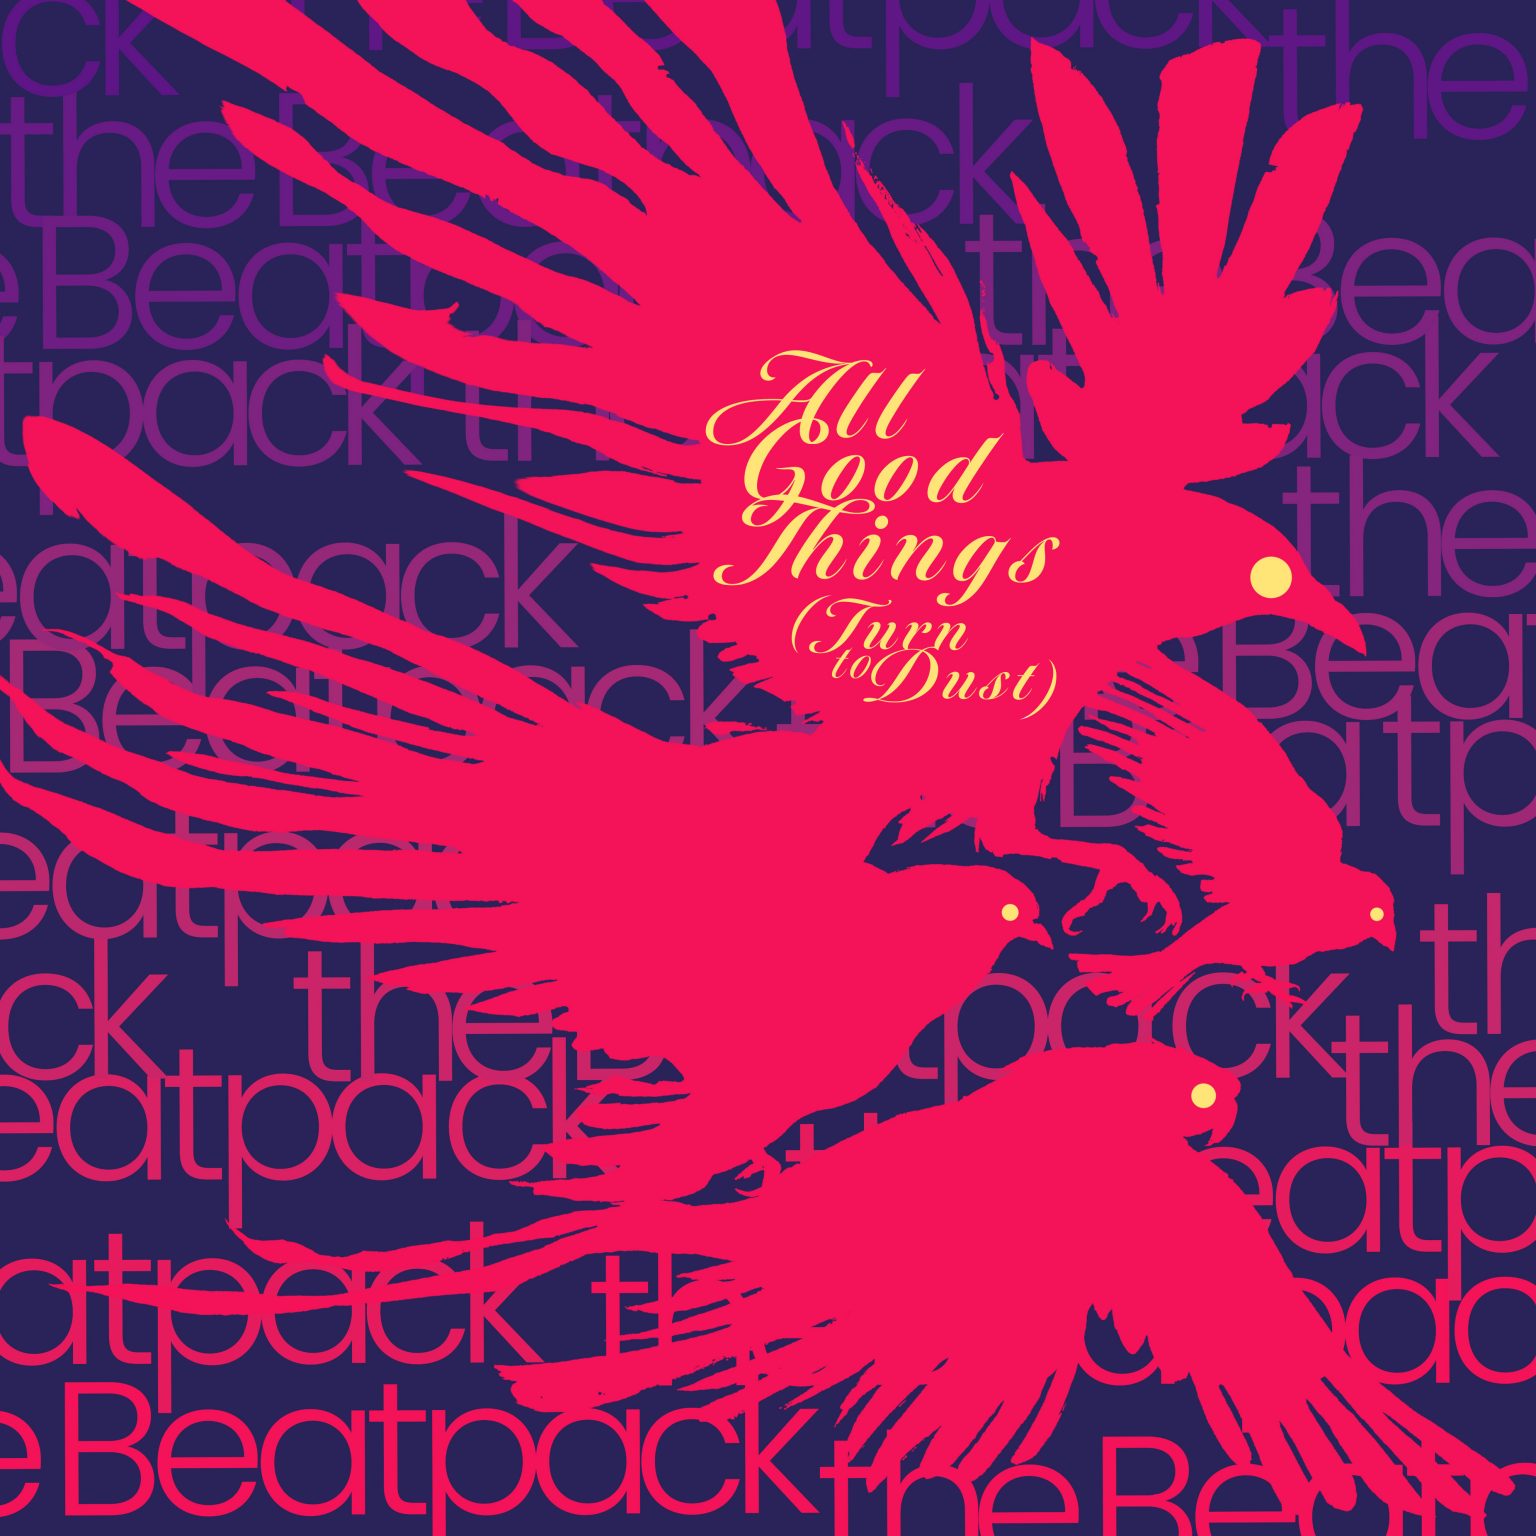 The Beatpack All Good Things (Turn To Dust) LP Spinout Productions